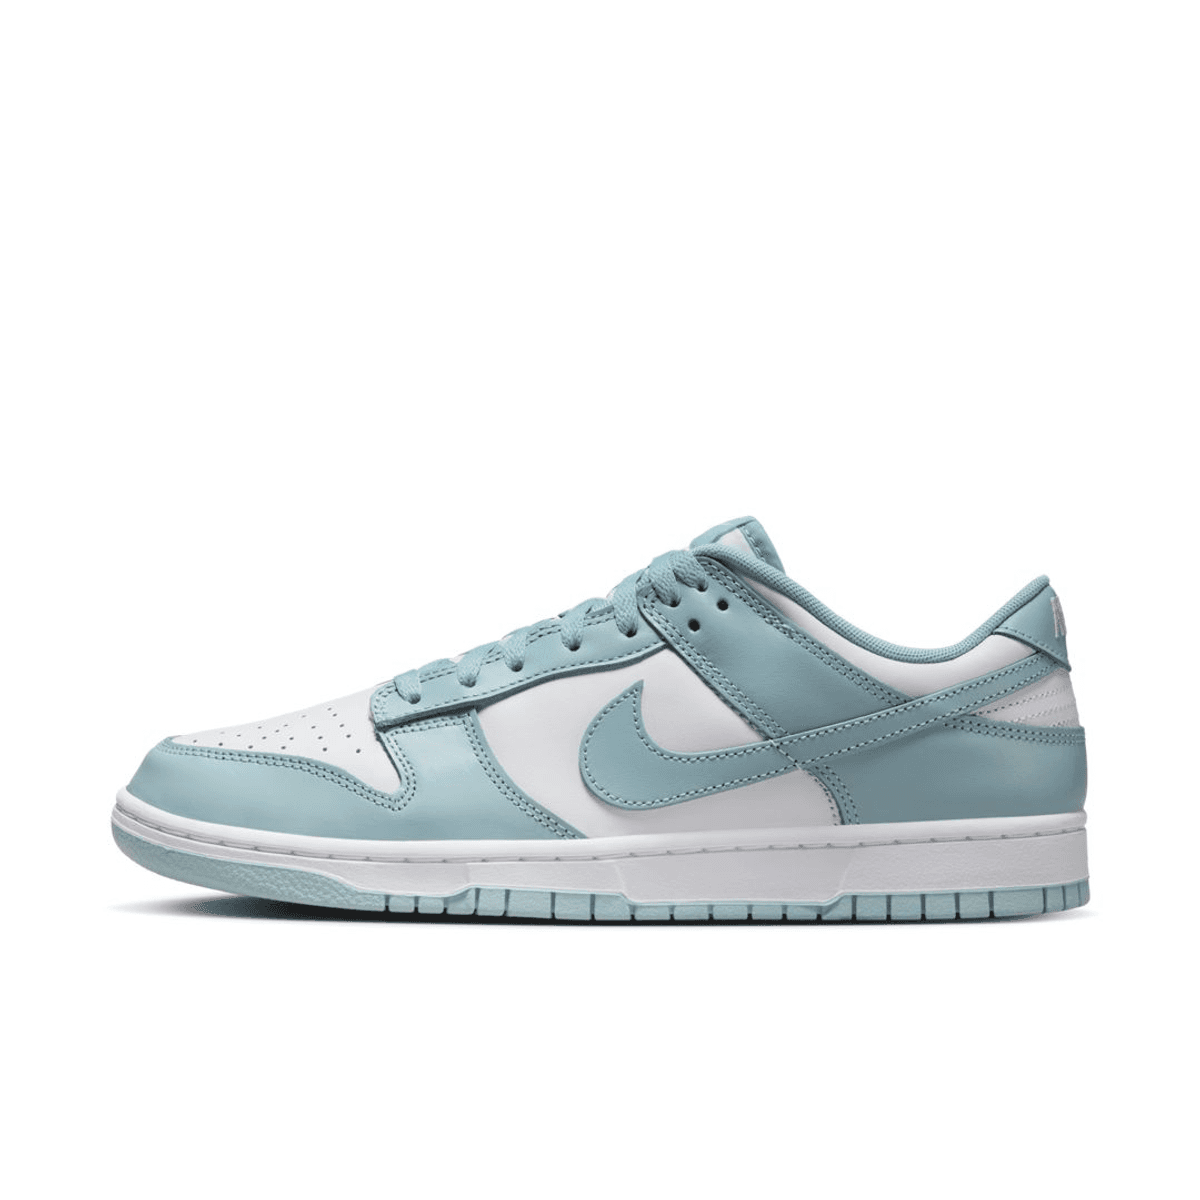 Official Look At The Nike Dunk Low "Denim Turquoise"